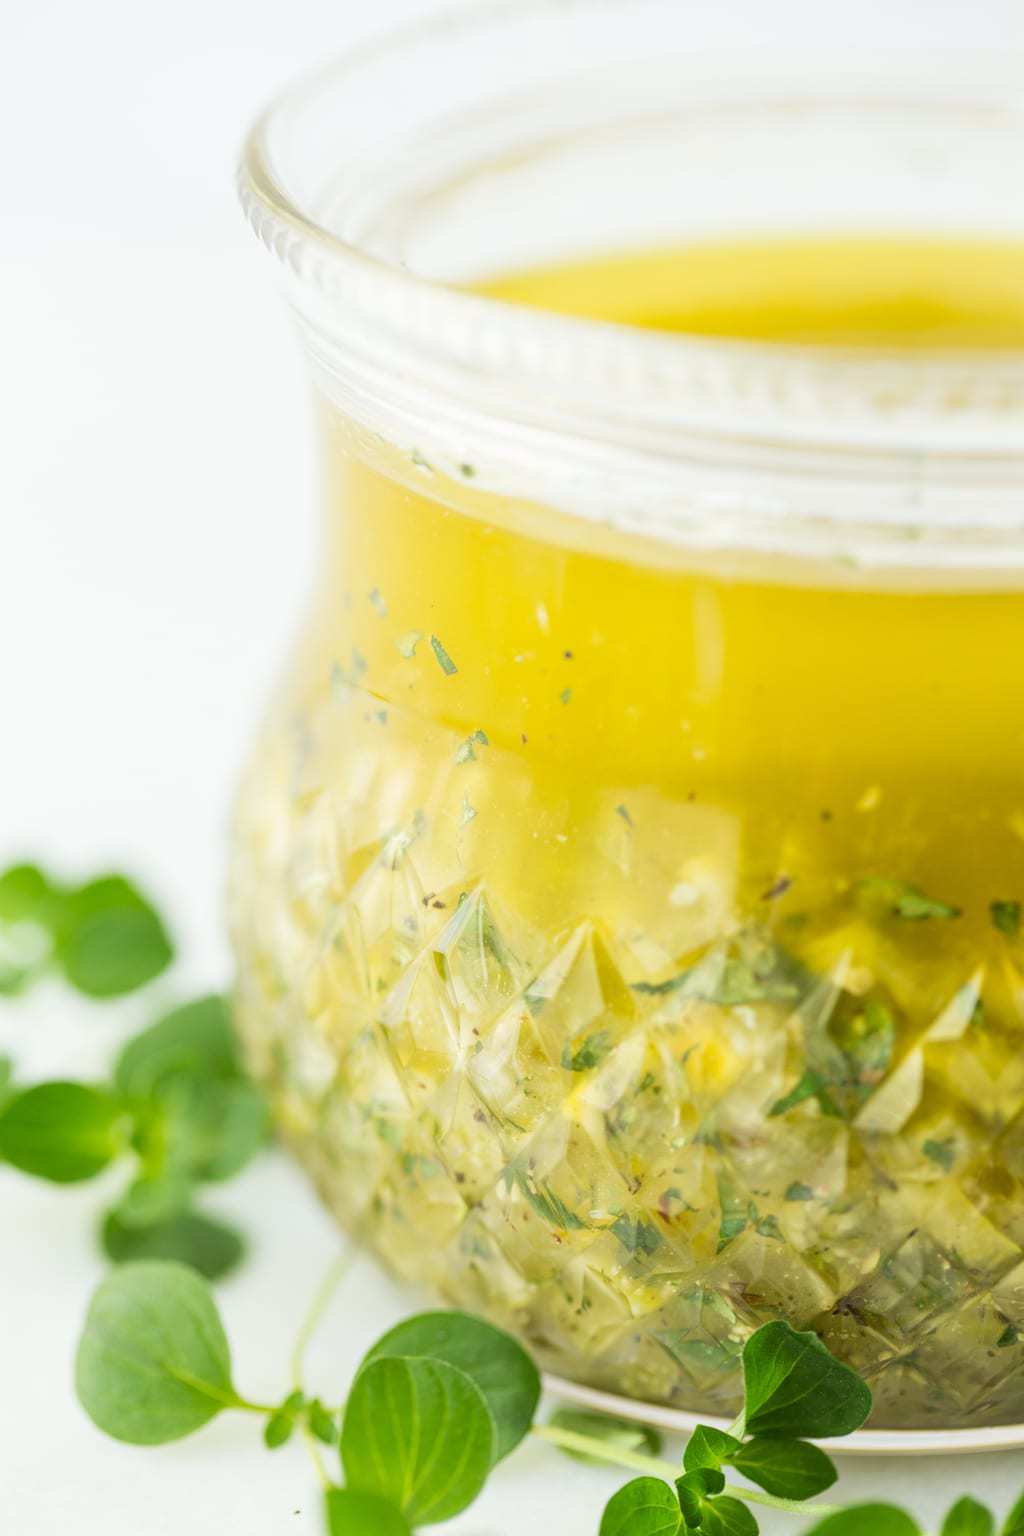 With bright, fresh lemon flavor, this Lemon Oregano Salad Dressing is delicious on just about any salad; but how about on grilled chicken, shrimp and pork, roasted veggies, steamed potatoes ... everything? thecafesucrefarine.com